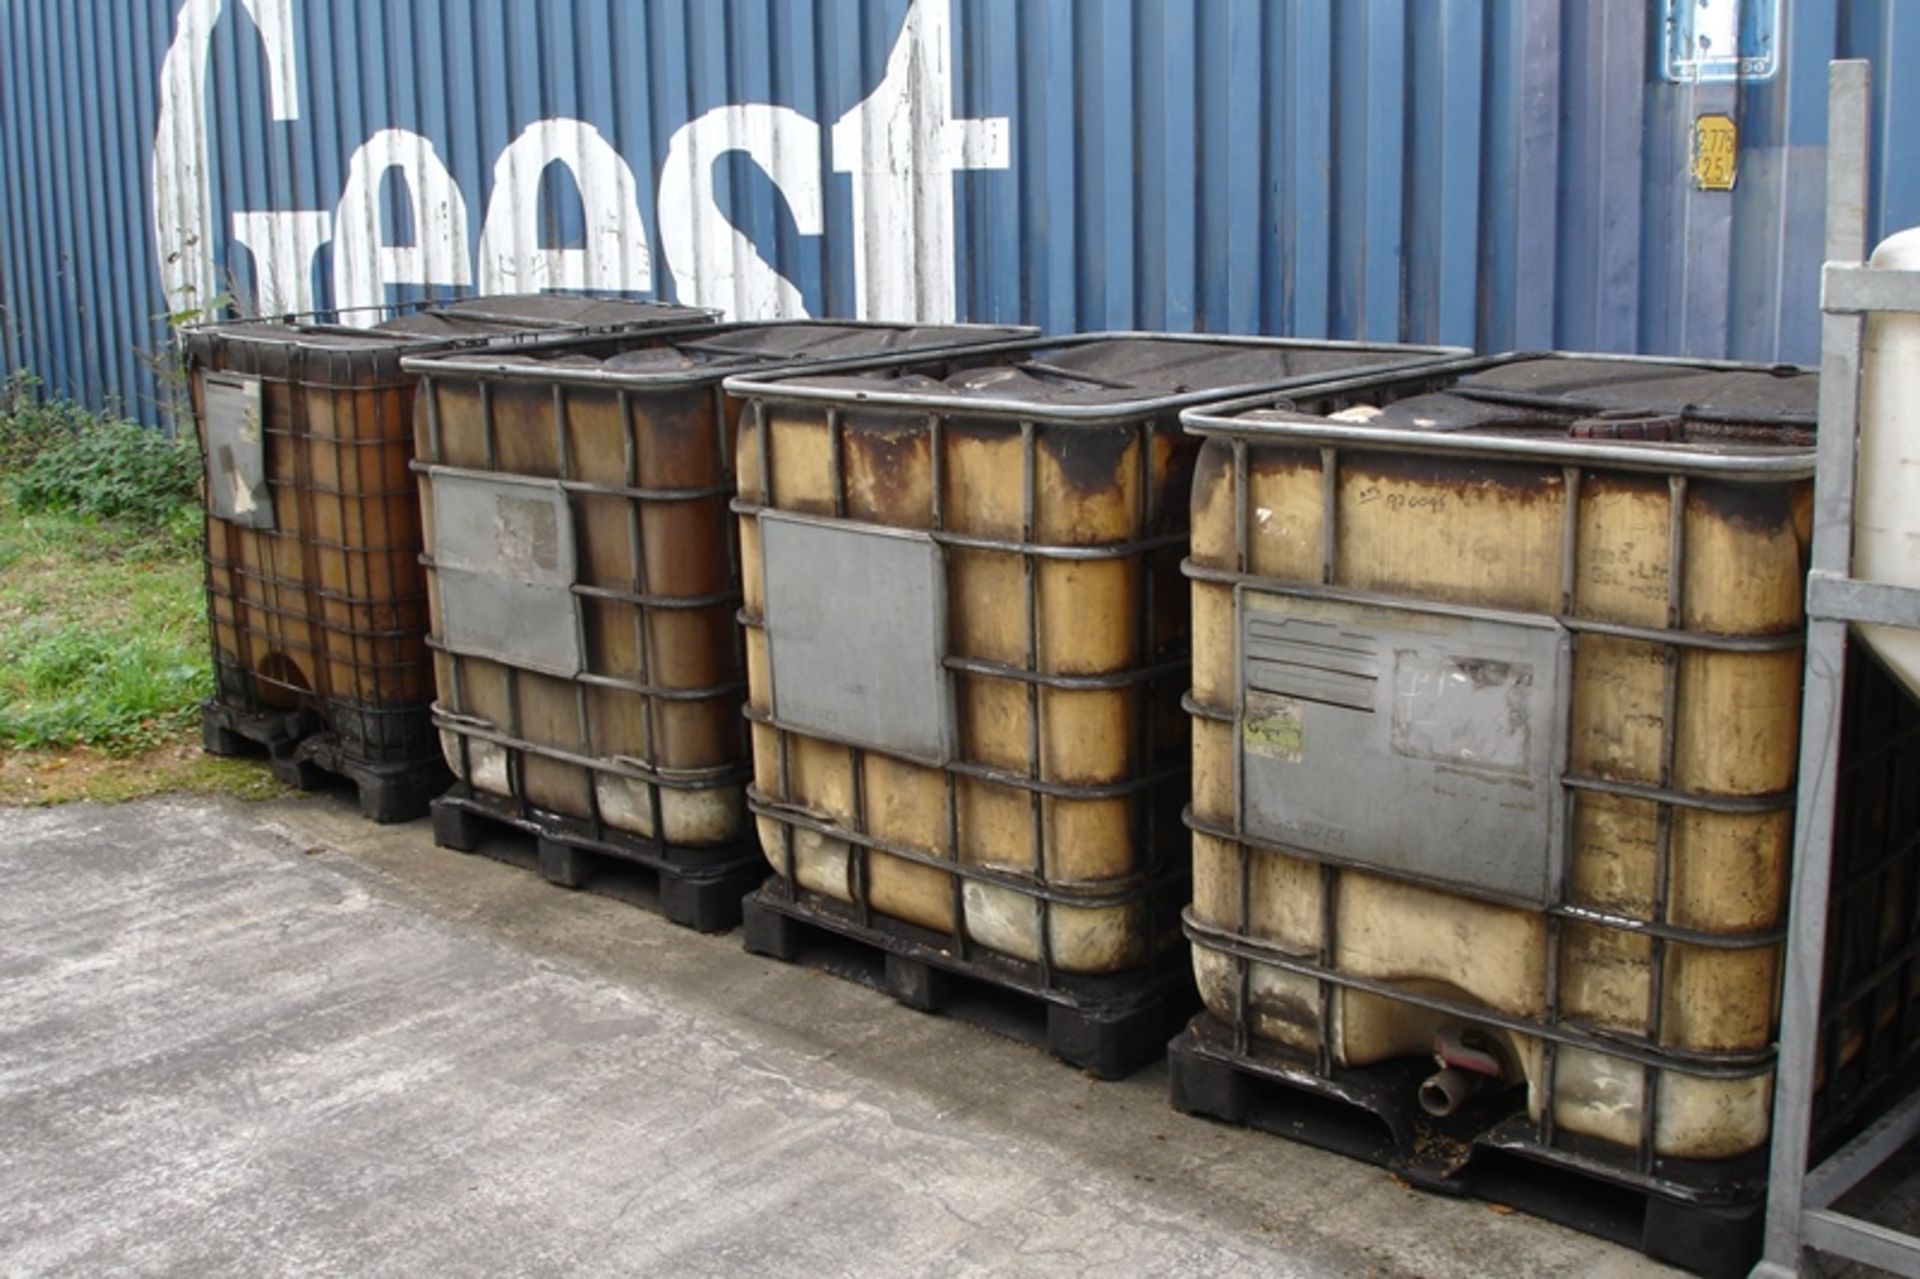 4 x IBC's previously used for Red Diesel